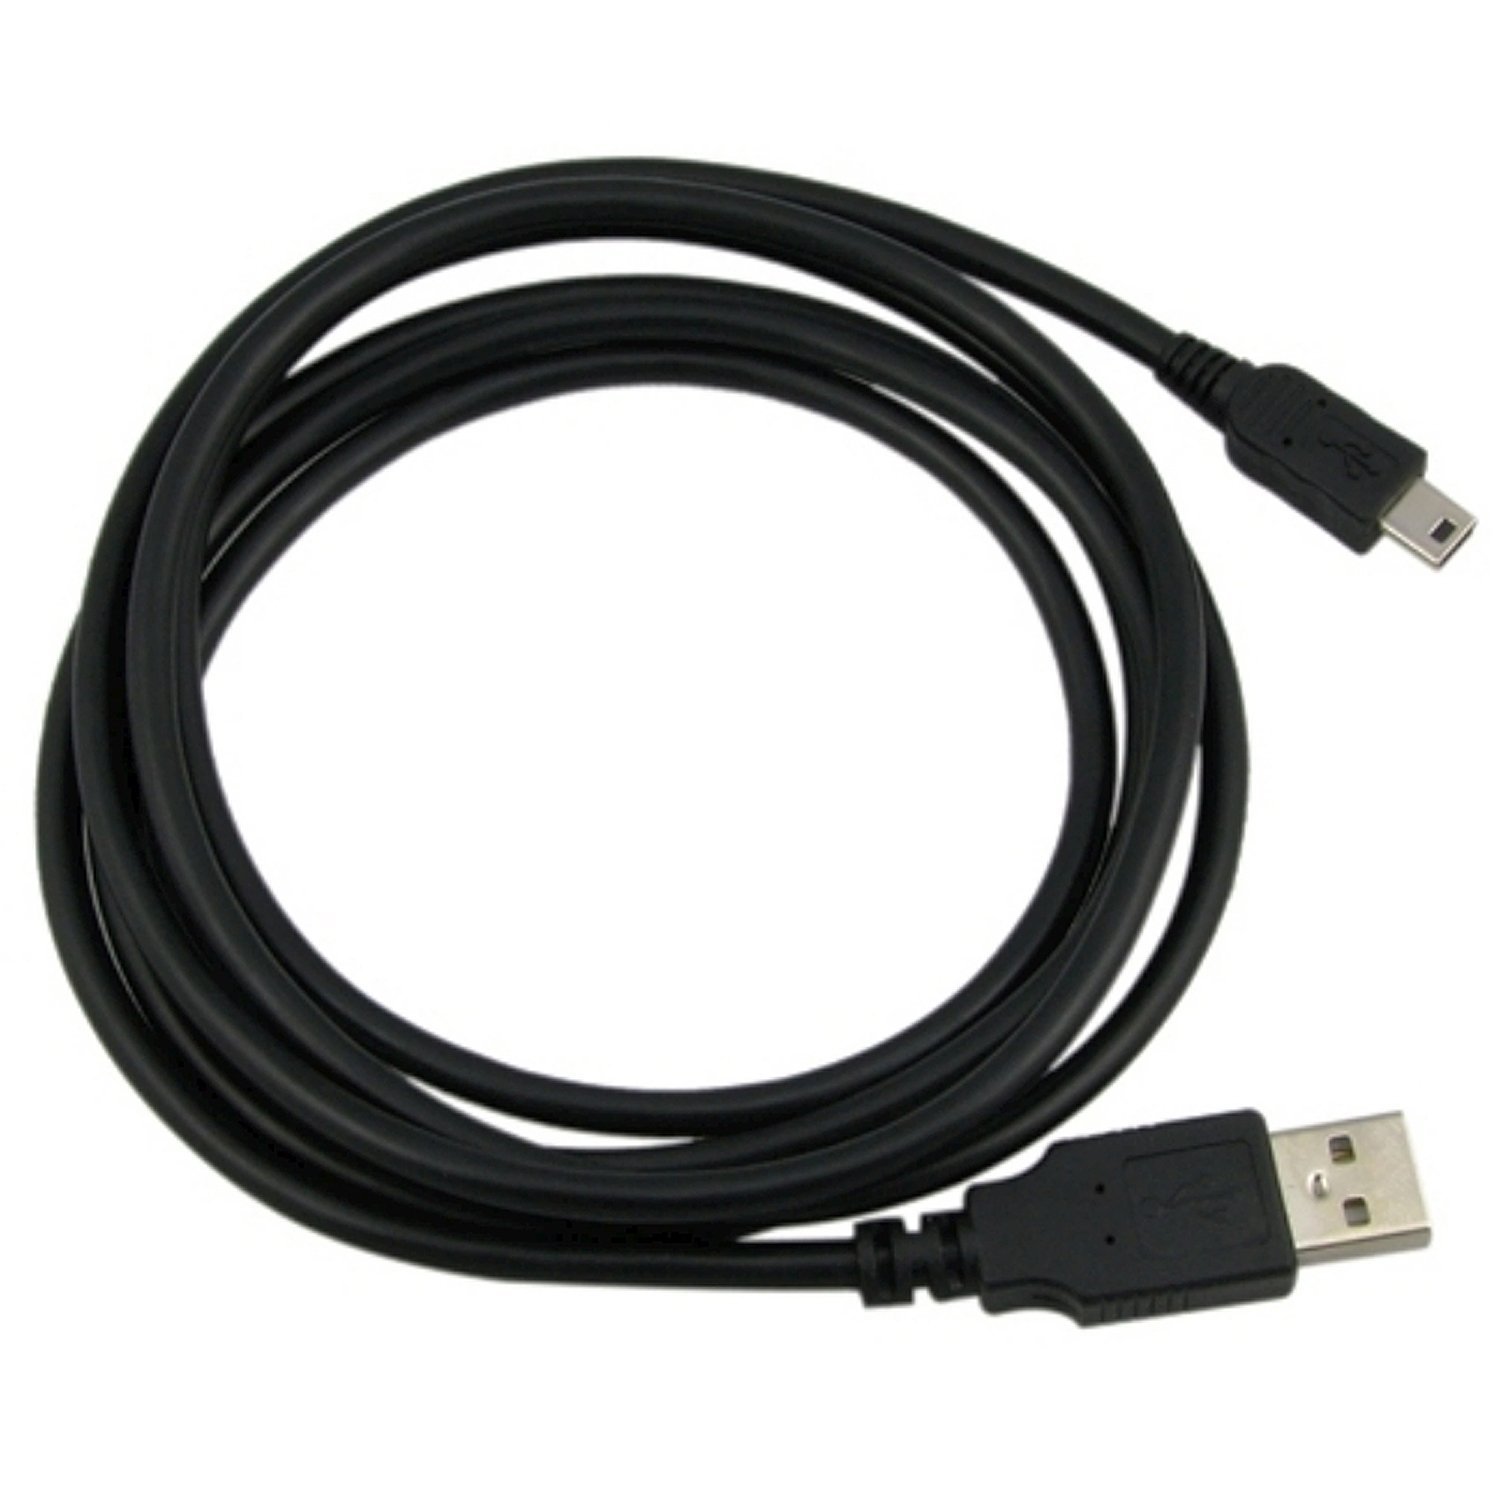 EpicDealz  USB2.0 Cable Cord For Audio-Technica AT2020USBi Cardioid Condenser USB Microphone -3Ft - image 2 of 4